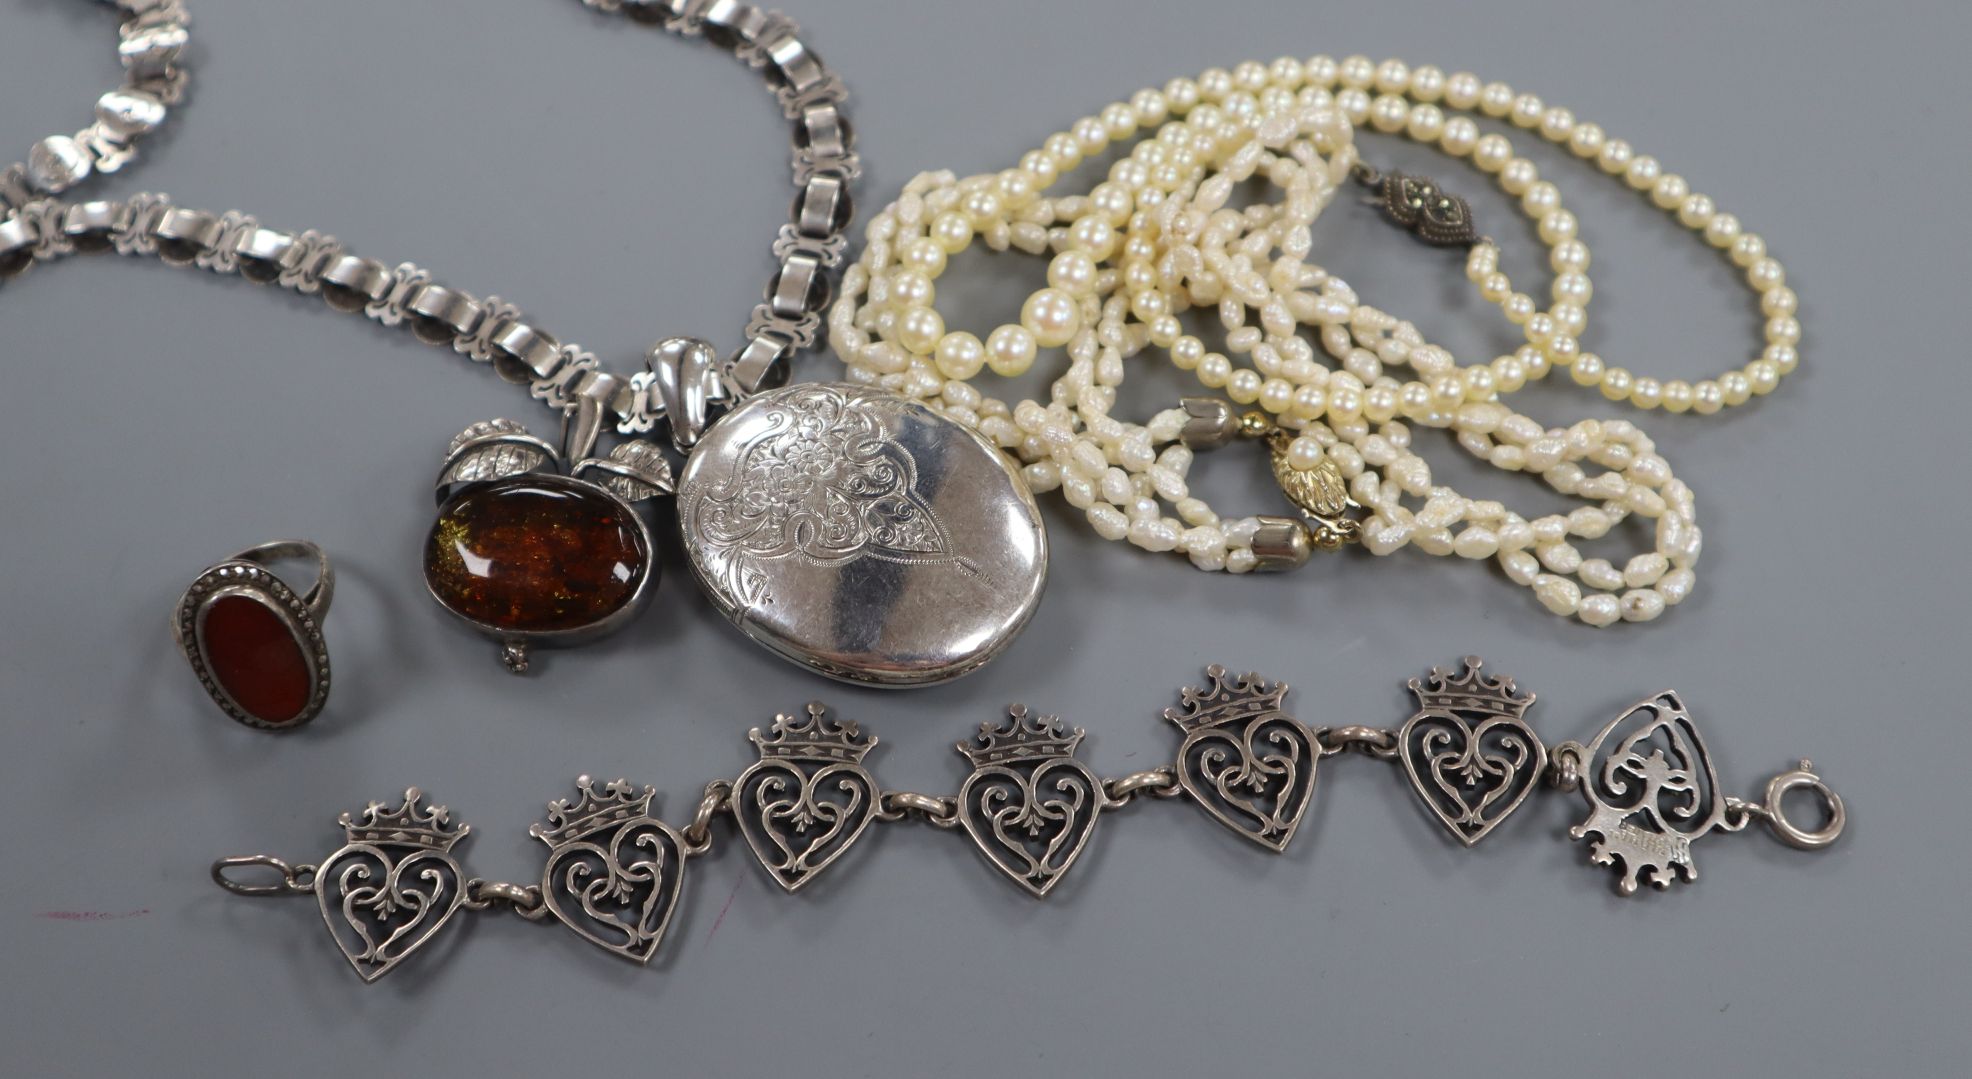 A white metal locket on chain, an Iona white metal bracelet, a brooch, a ring and two pearl